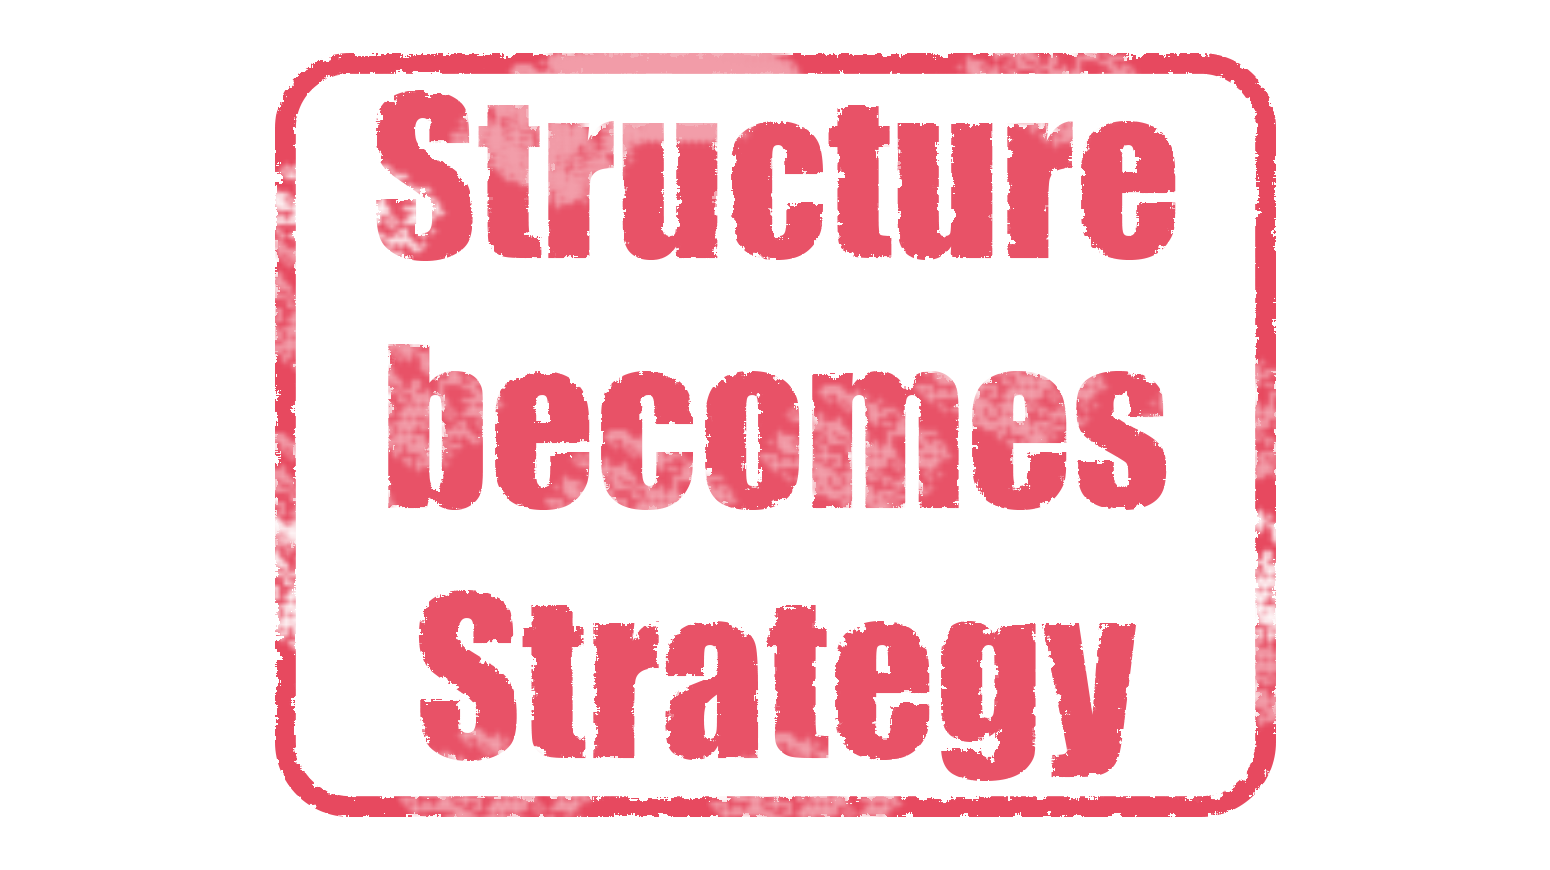 Structure becomes Strategy